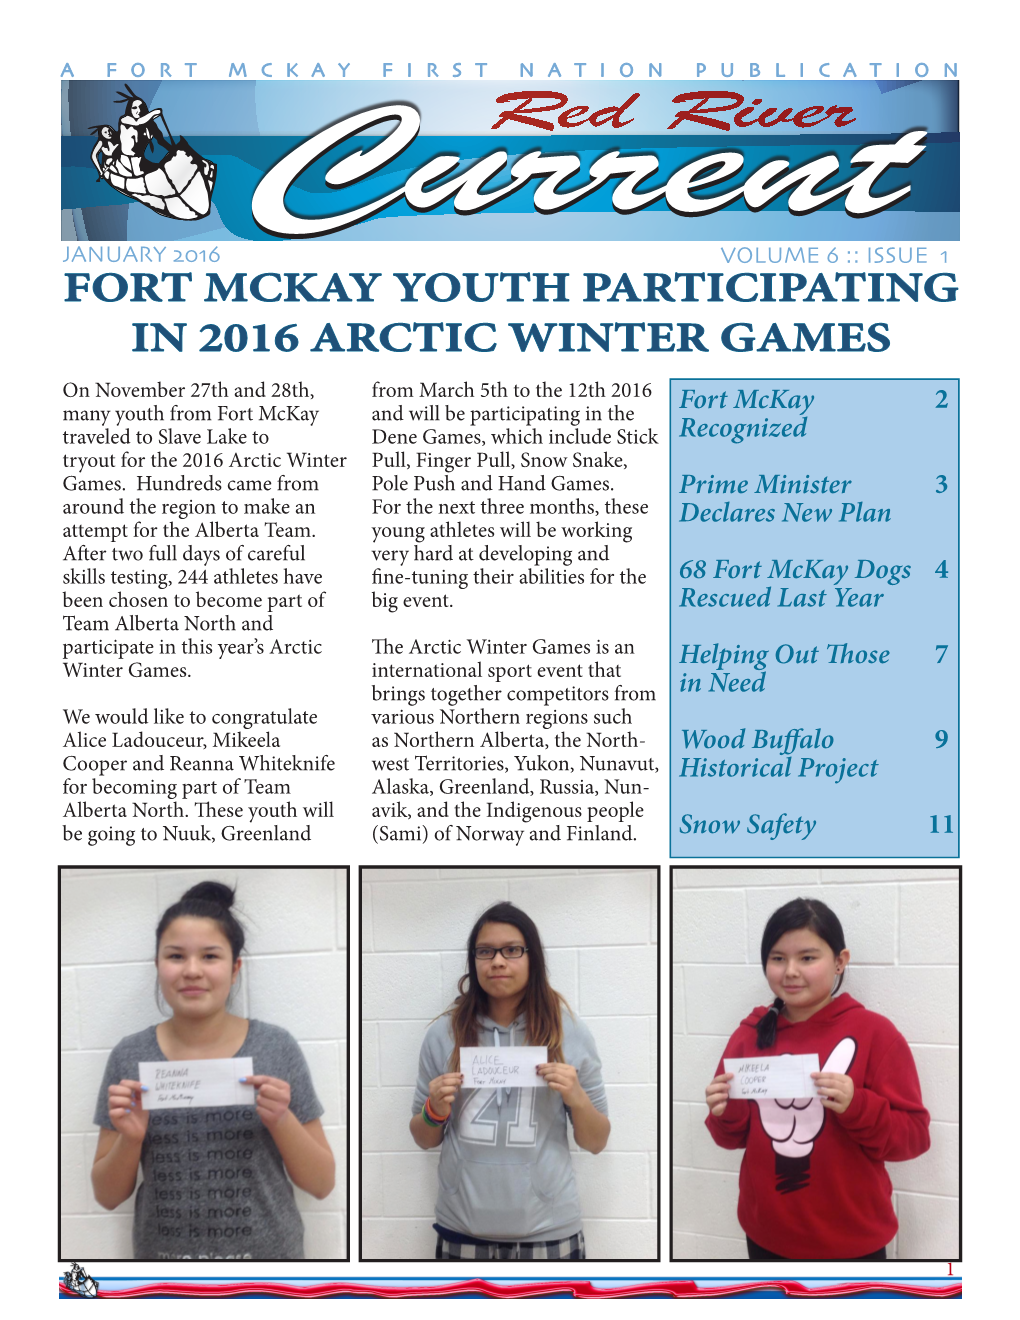 Fort Mckay Youth Participating in 2016 Arctic